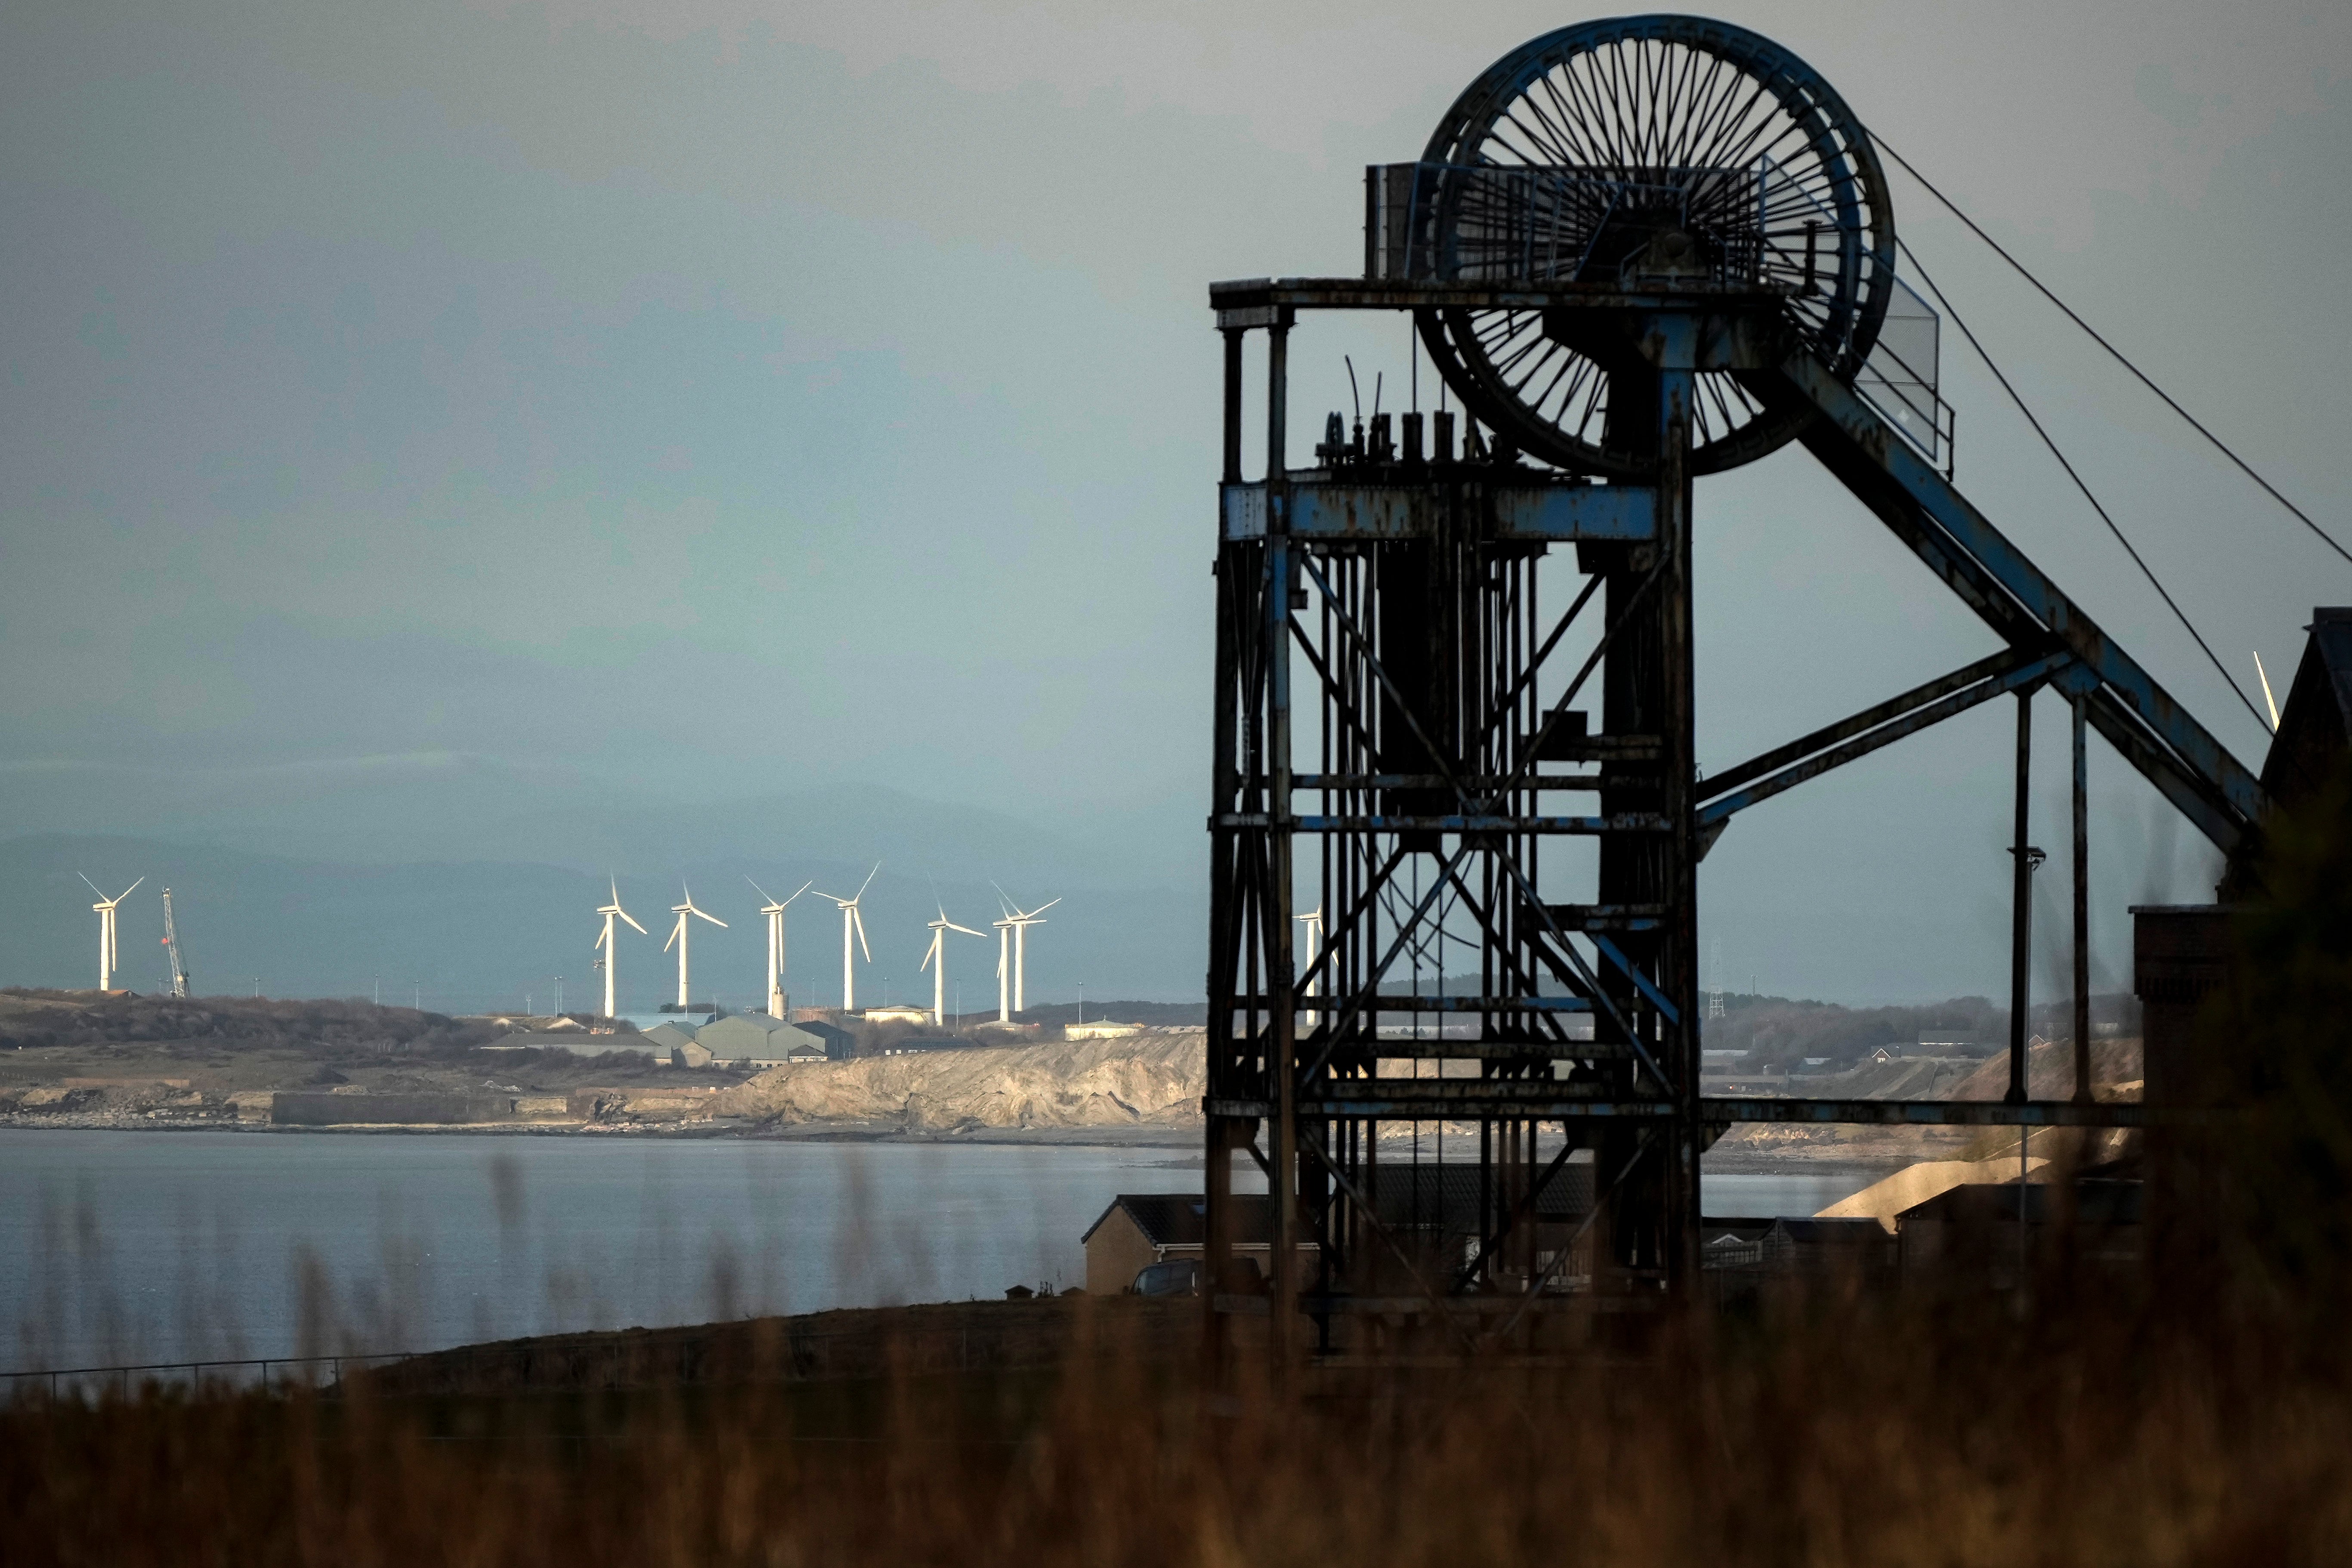 Contracters in Whitehaven have been given the go-ahead to begin extracting coal